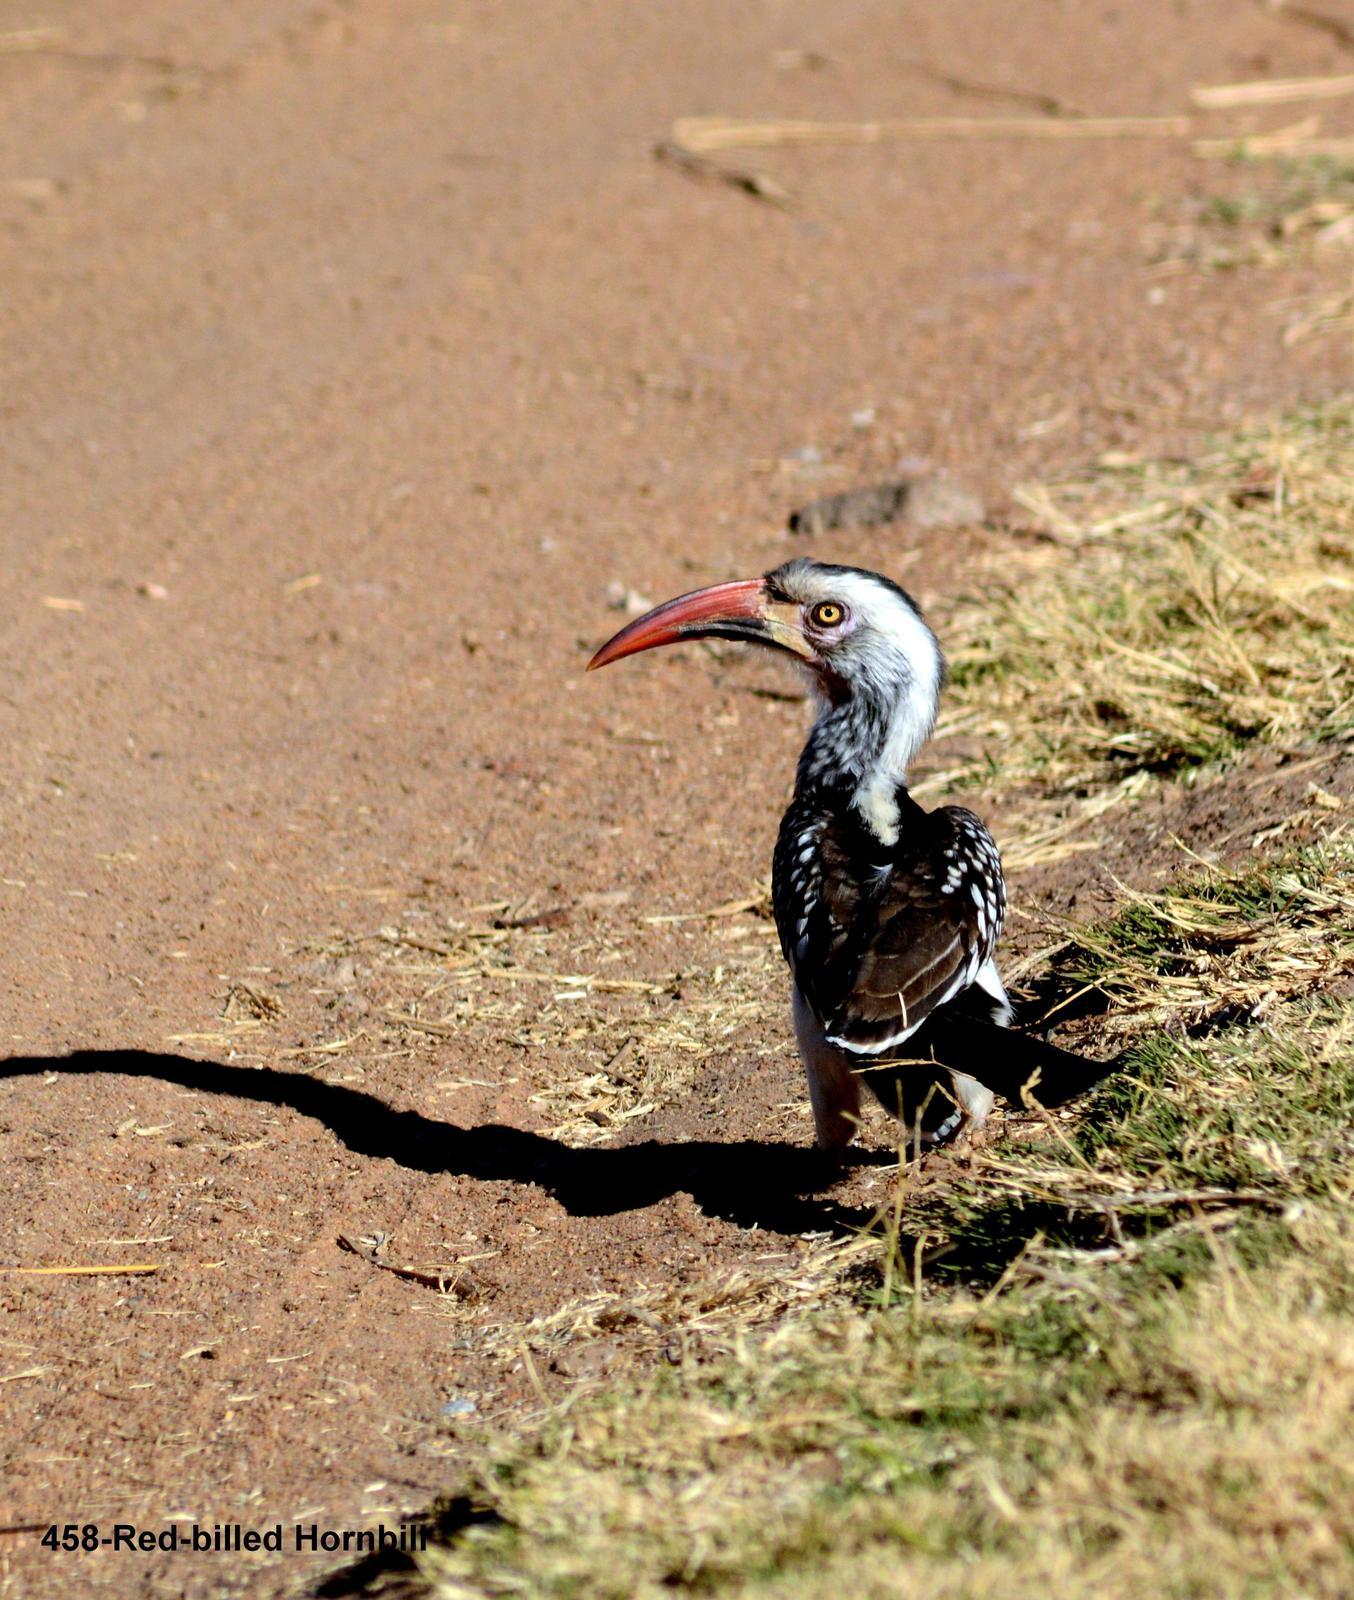 Southern Red-billed Hornbill Photo by Richard  Lowe